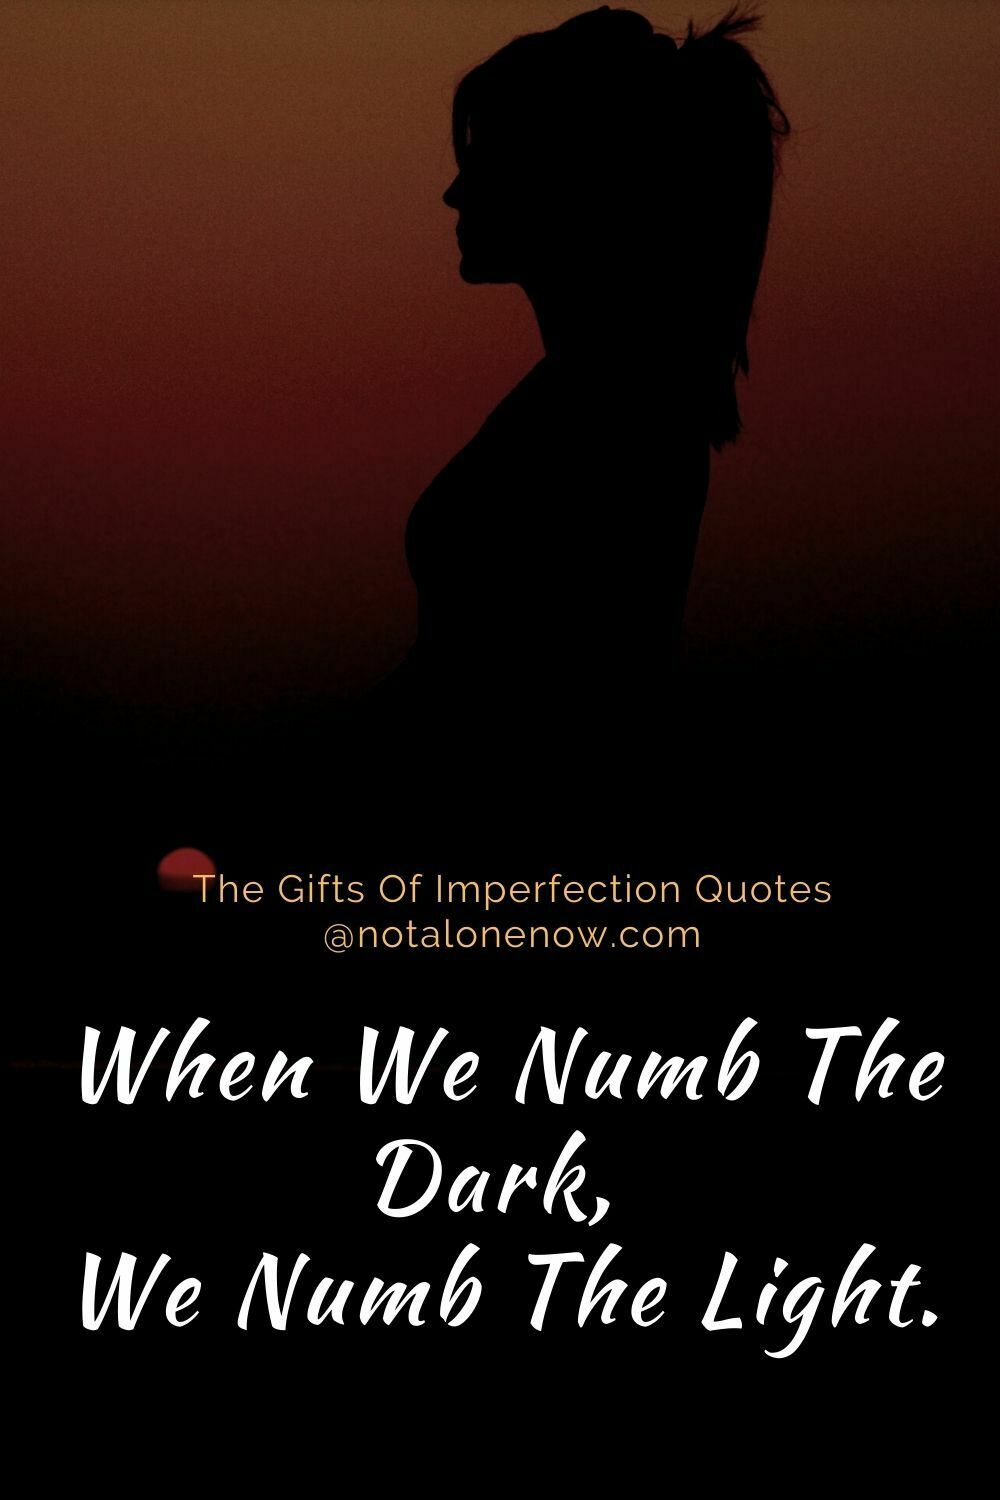 17 Inspirational Quotes From The Book The Gifts Of Imperfection